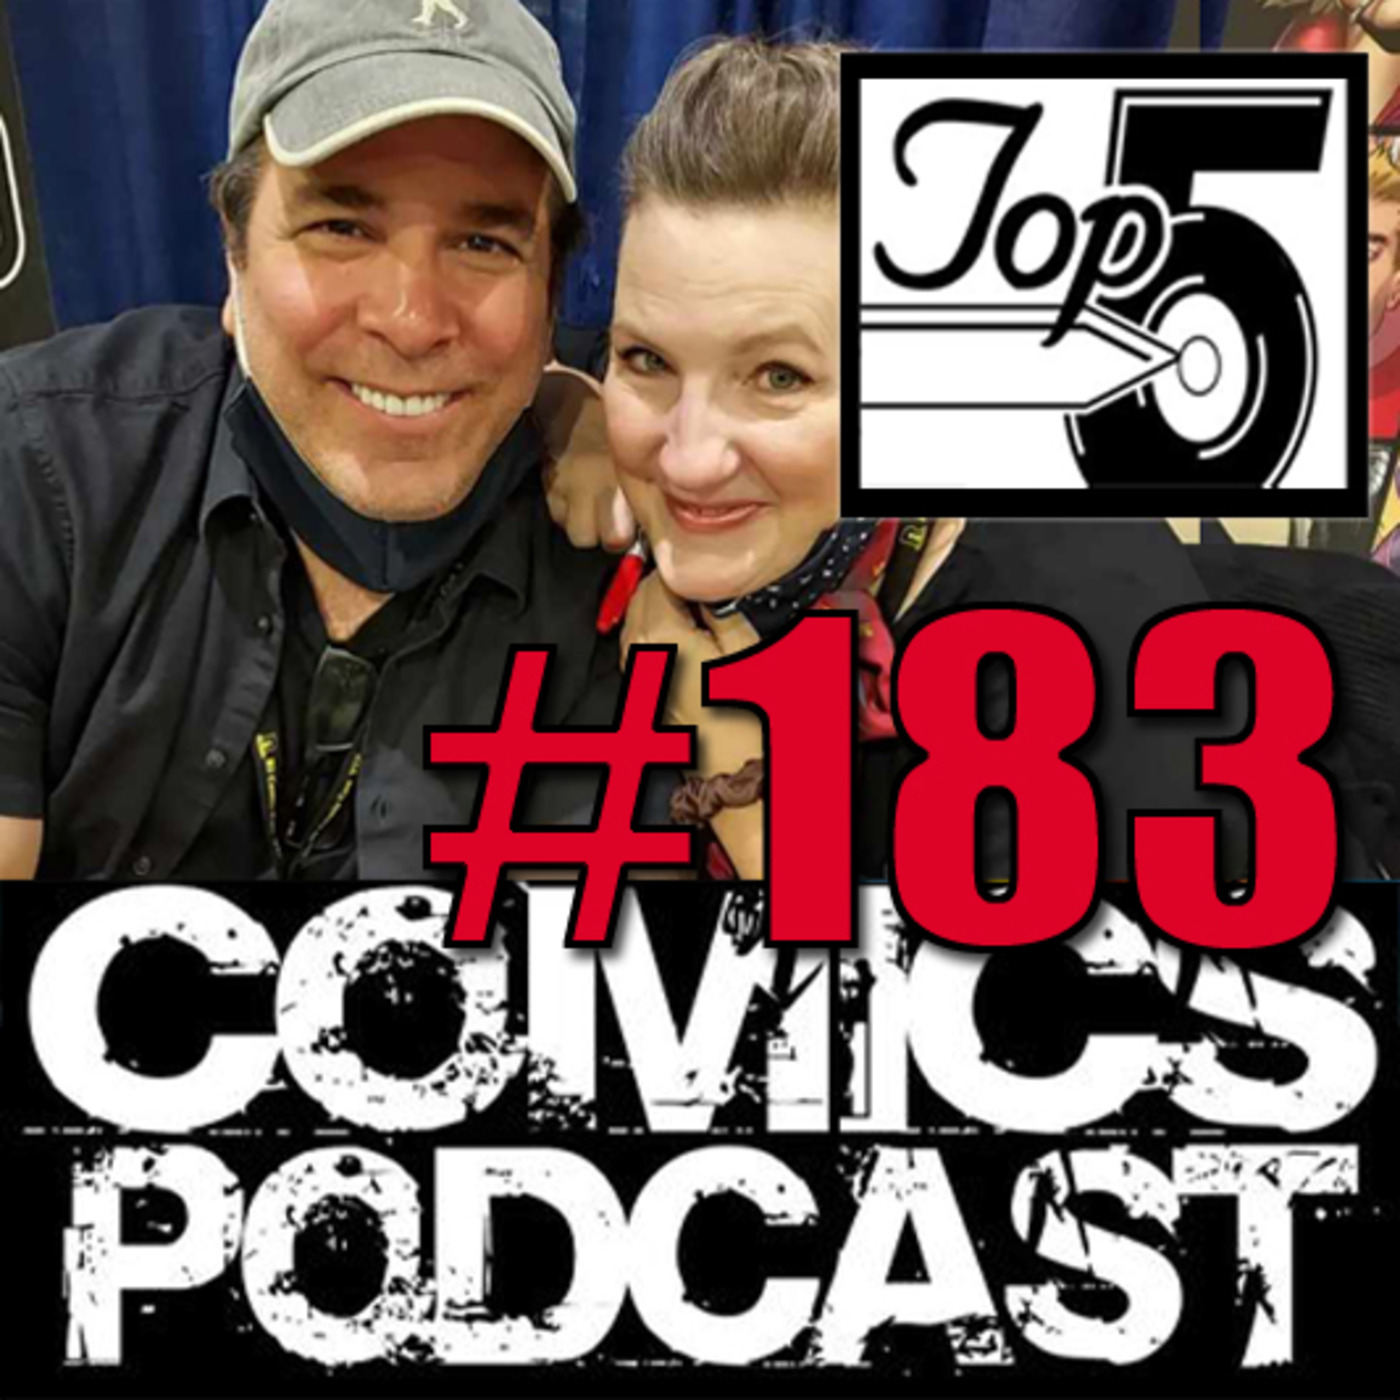 Episode 183: Top 5 Comics Podcast - Episode 183 - War For Earth 3 , Slumber, Wolverine Patch and interview @ Rhode Island Comic Con